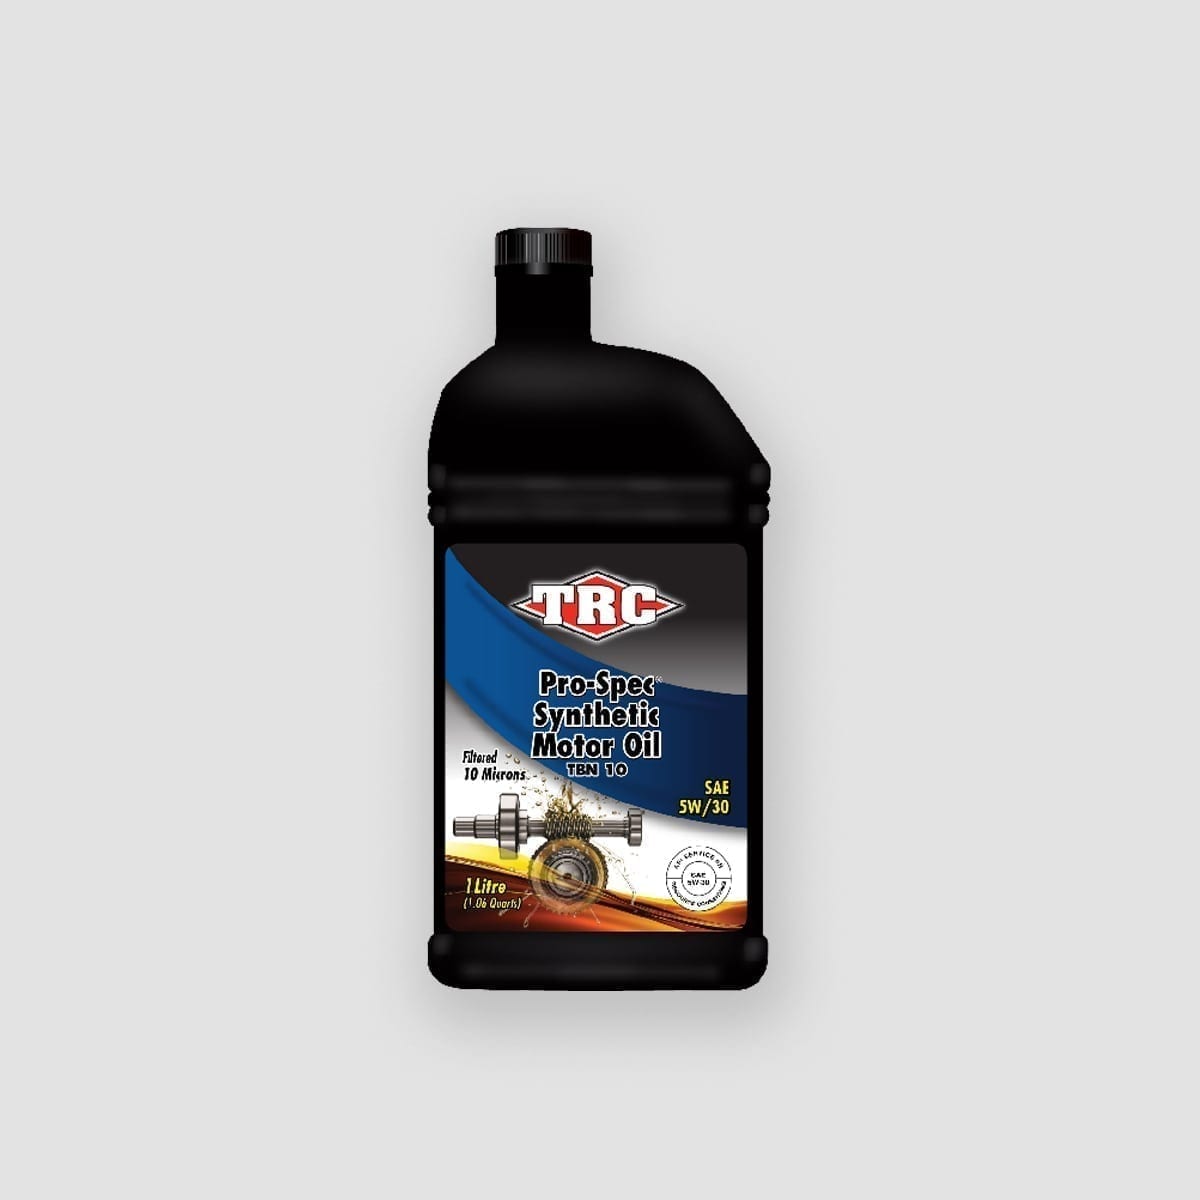 pro-spec-synthetic-motor-oil-sae-5w-30-01